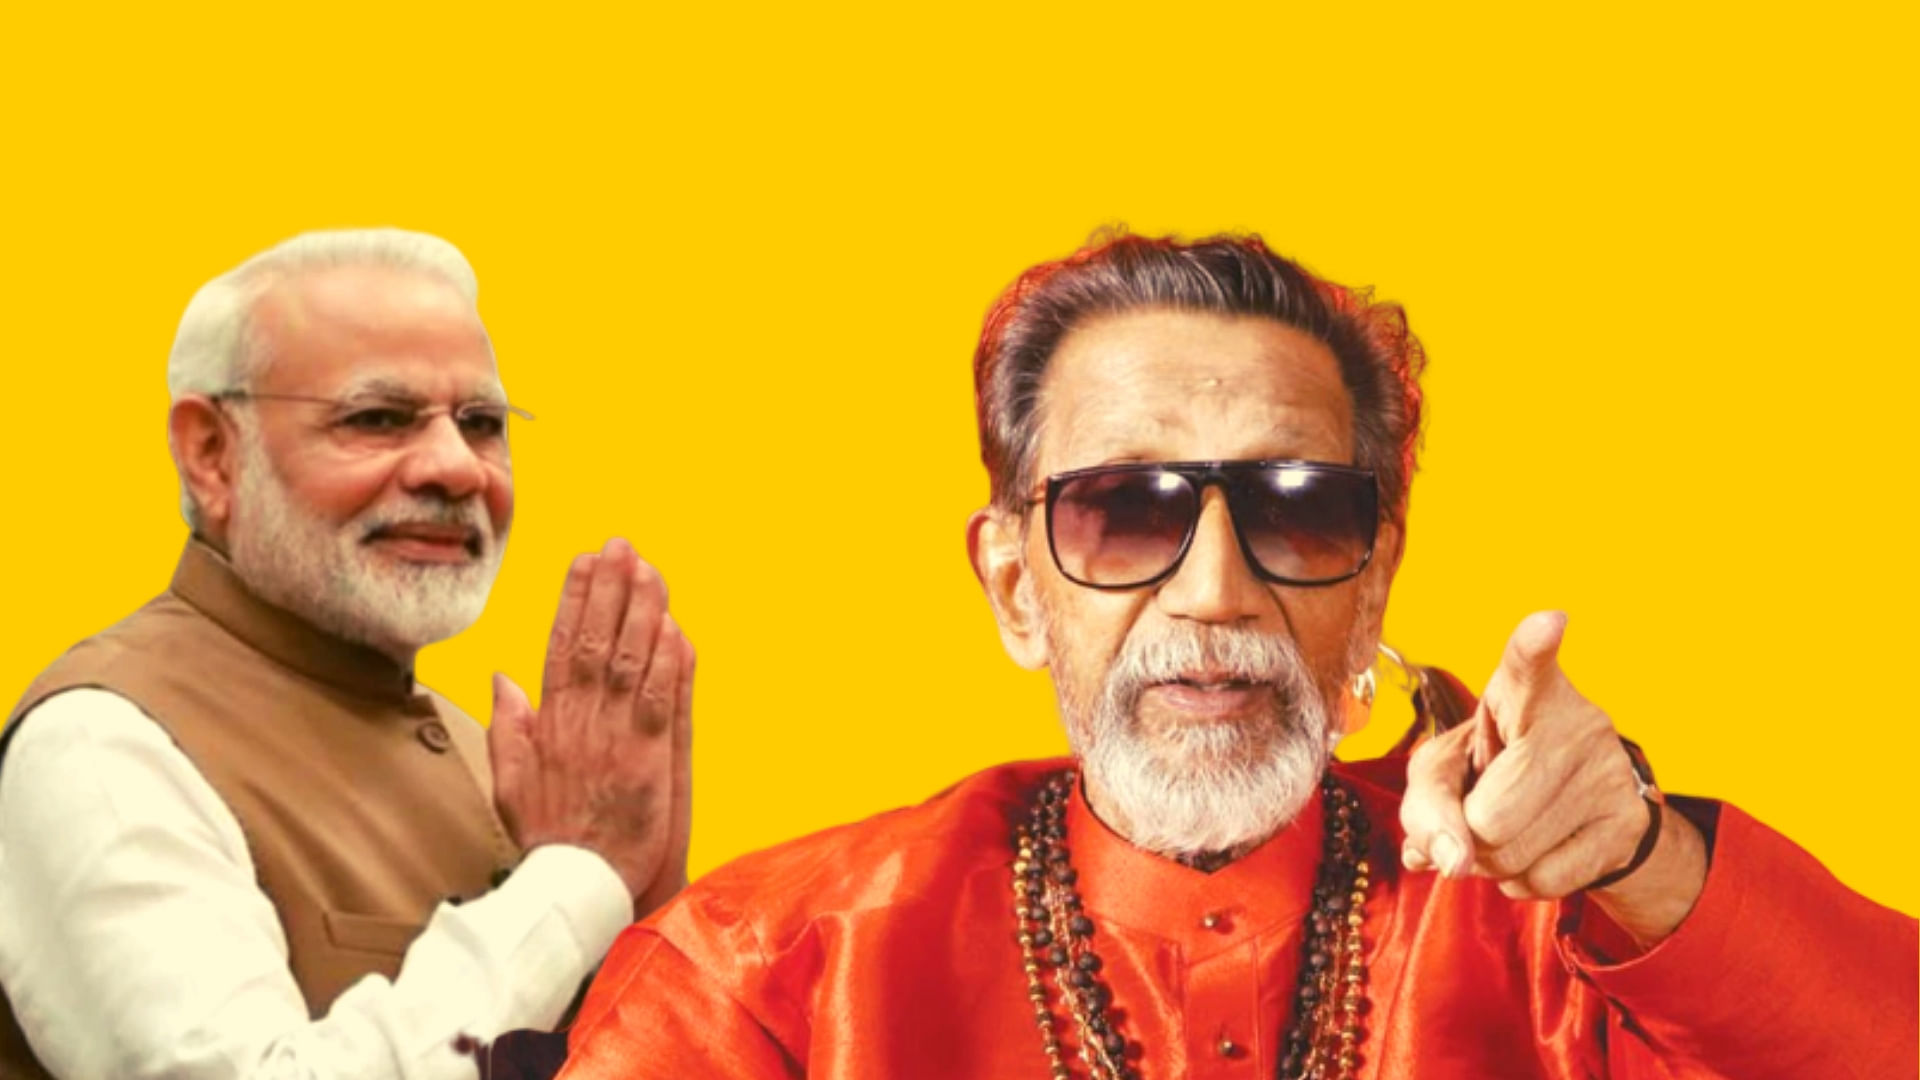 In a 2011 interview, Bal Thackeray predicted differences between Shiv Sena and BJP.